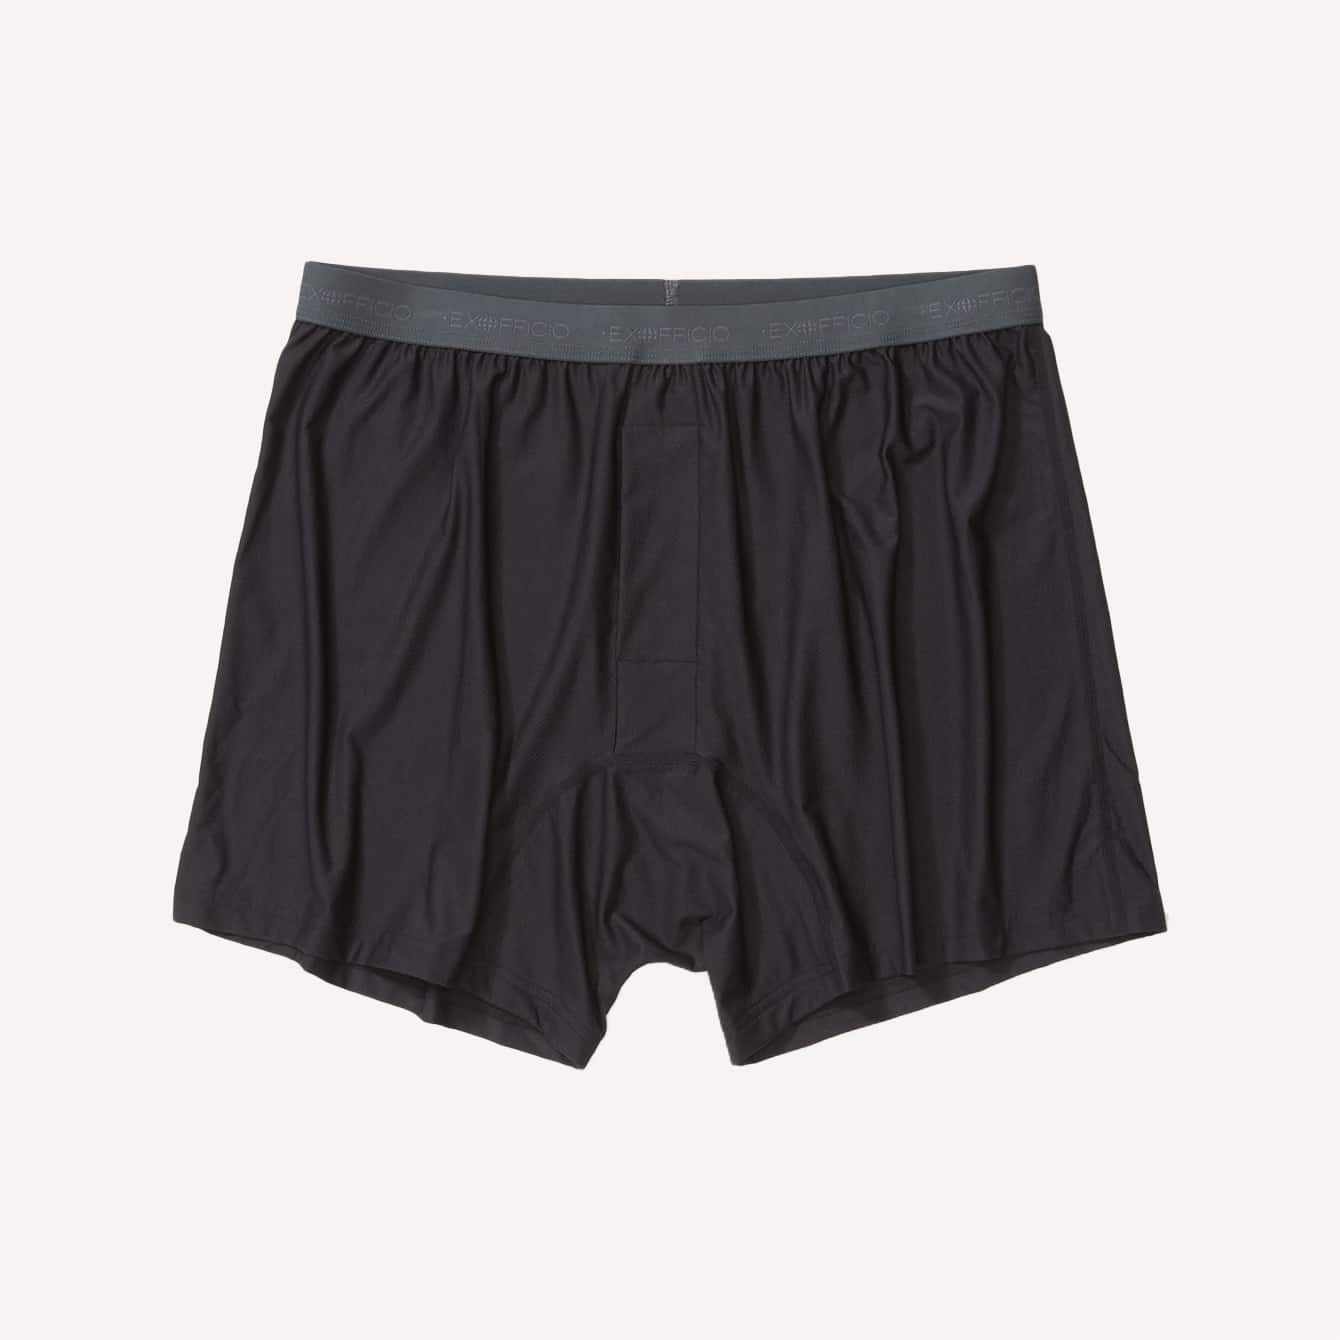 Manmade - The Boxer Brief That Delivers More Crotch Area Comfort